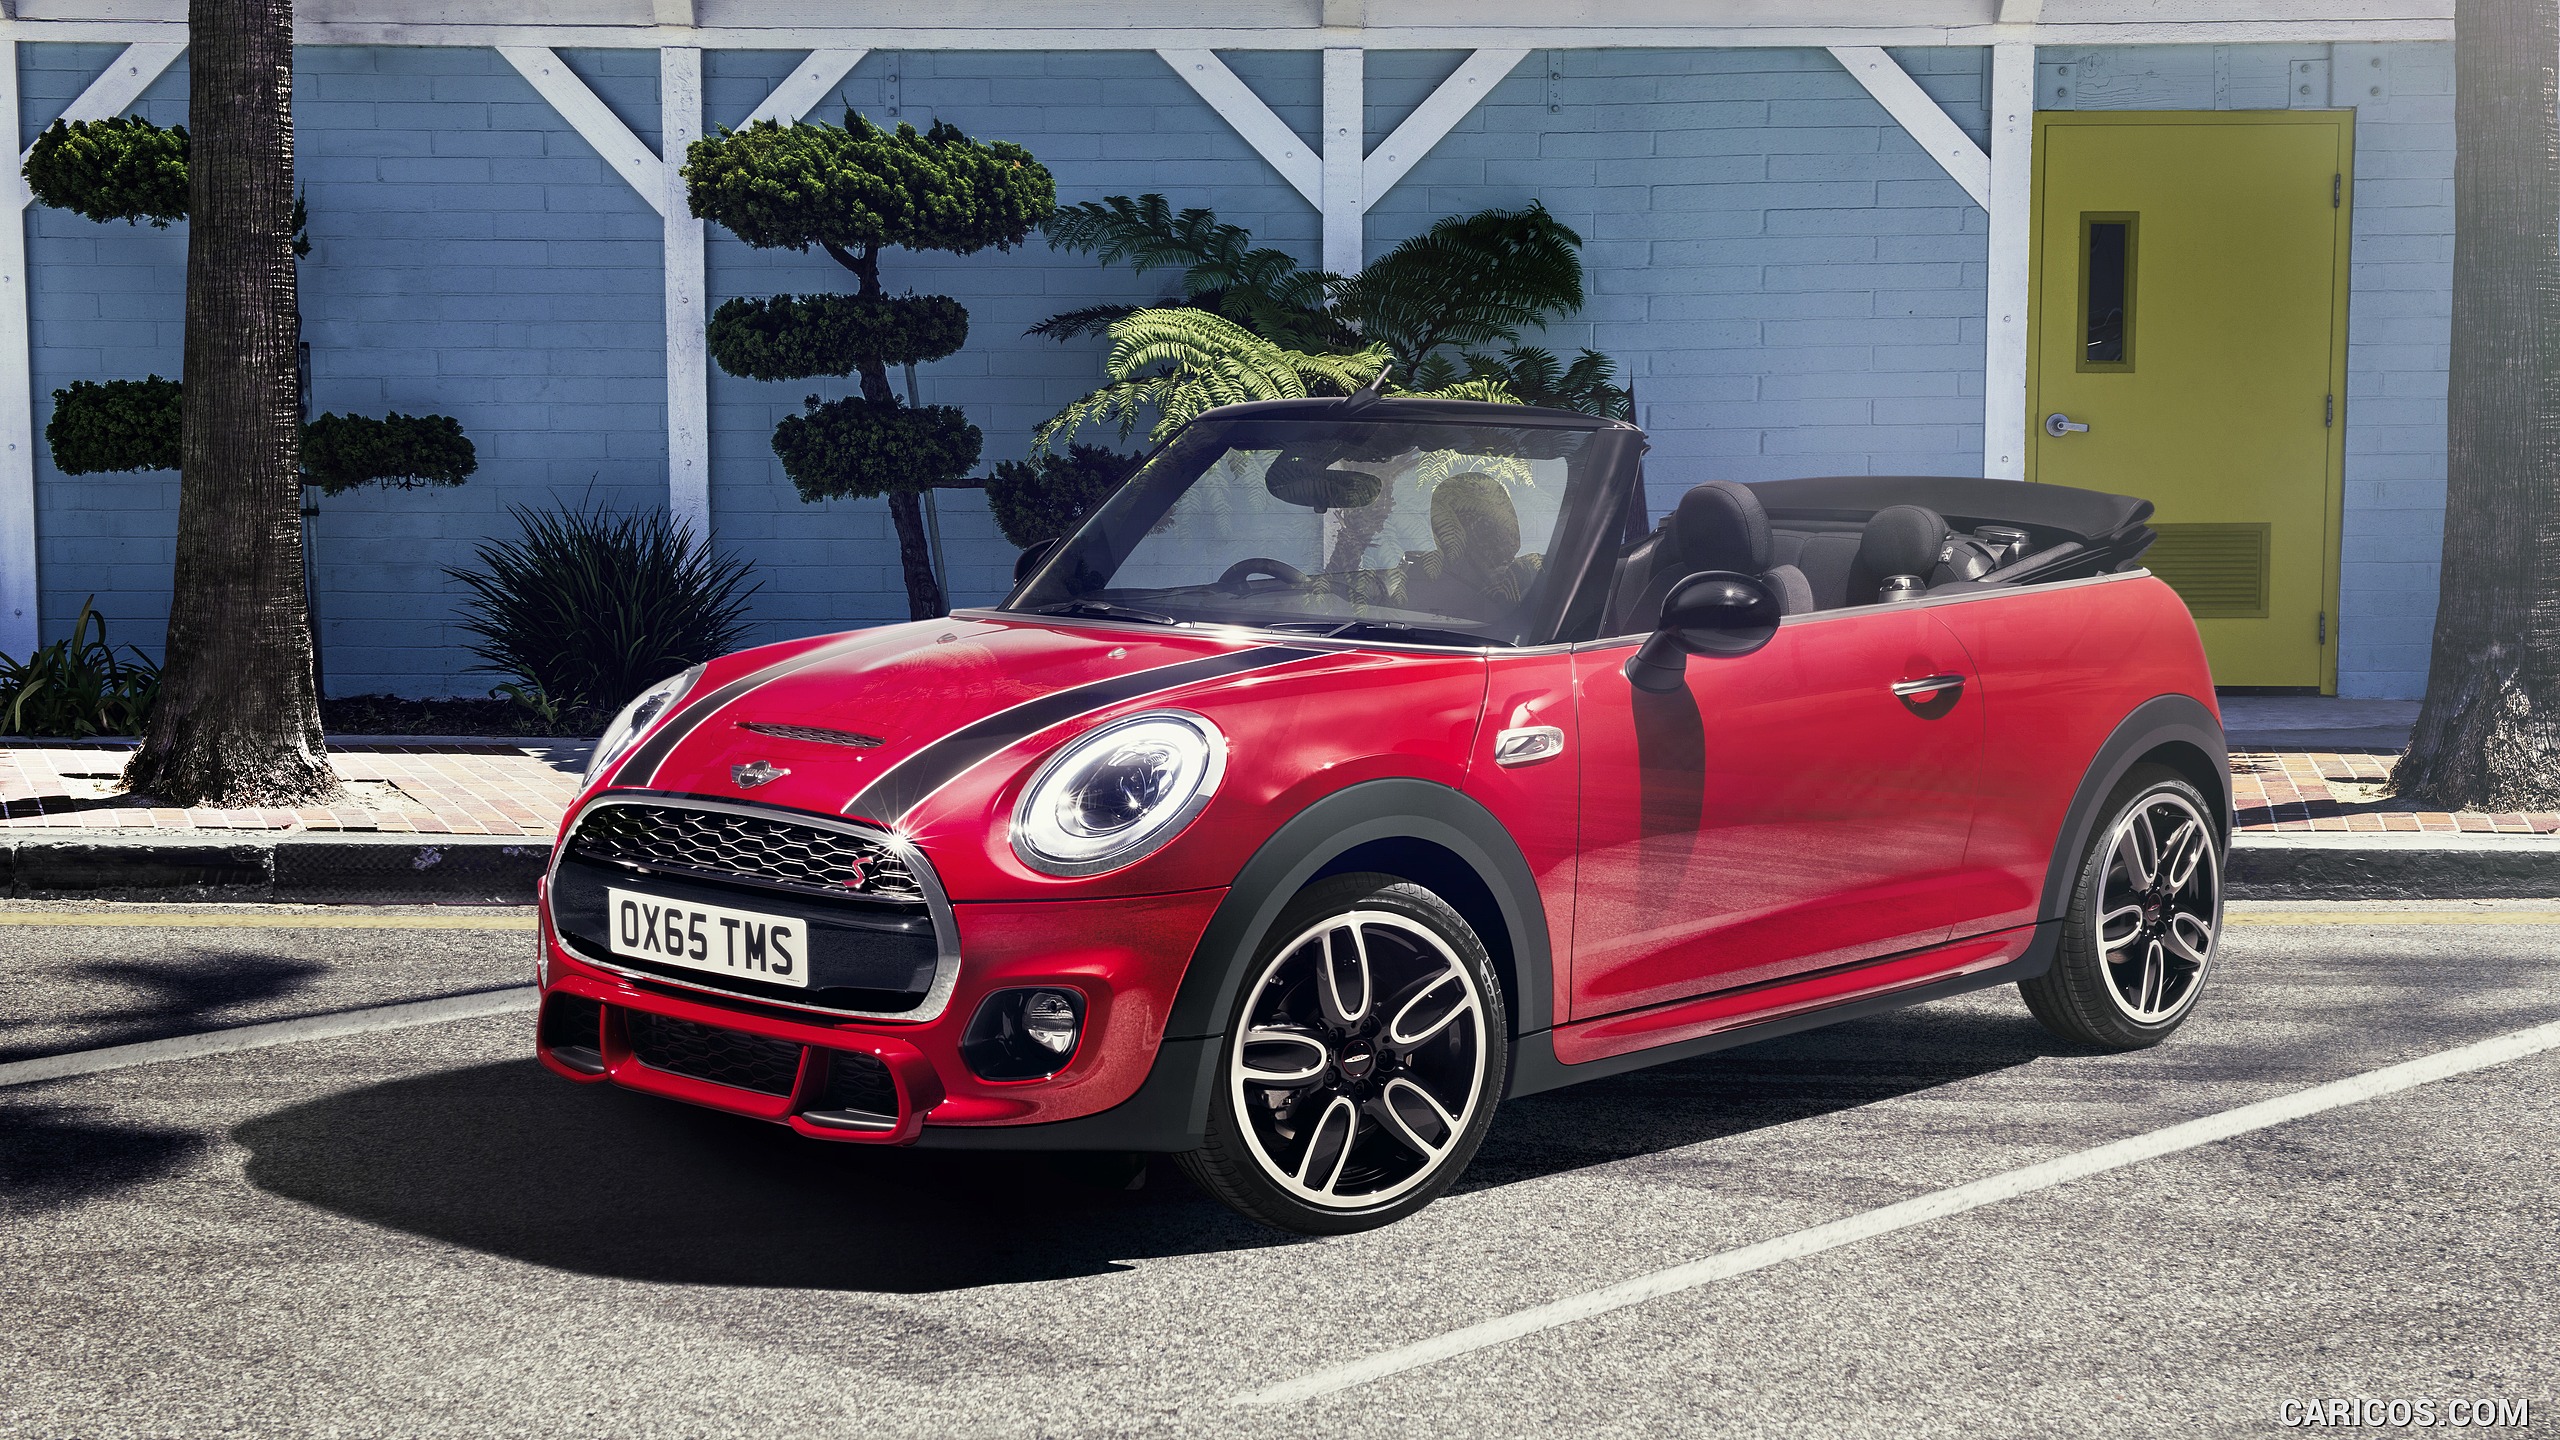 2016 MINI Cooper S Convertible with John Cooper Works Exterior package (Color: Chili Red), #5 of 147